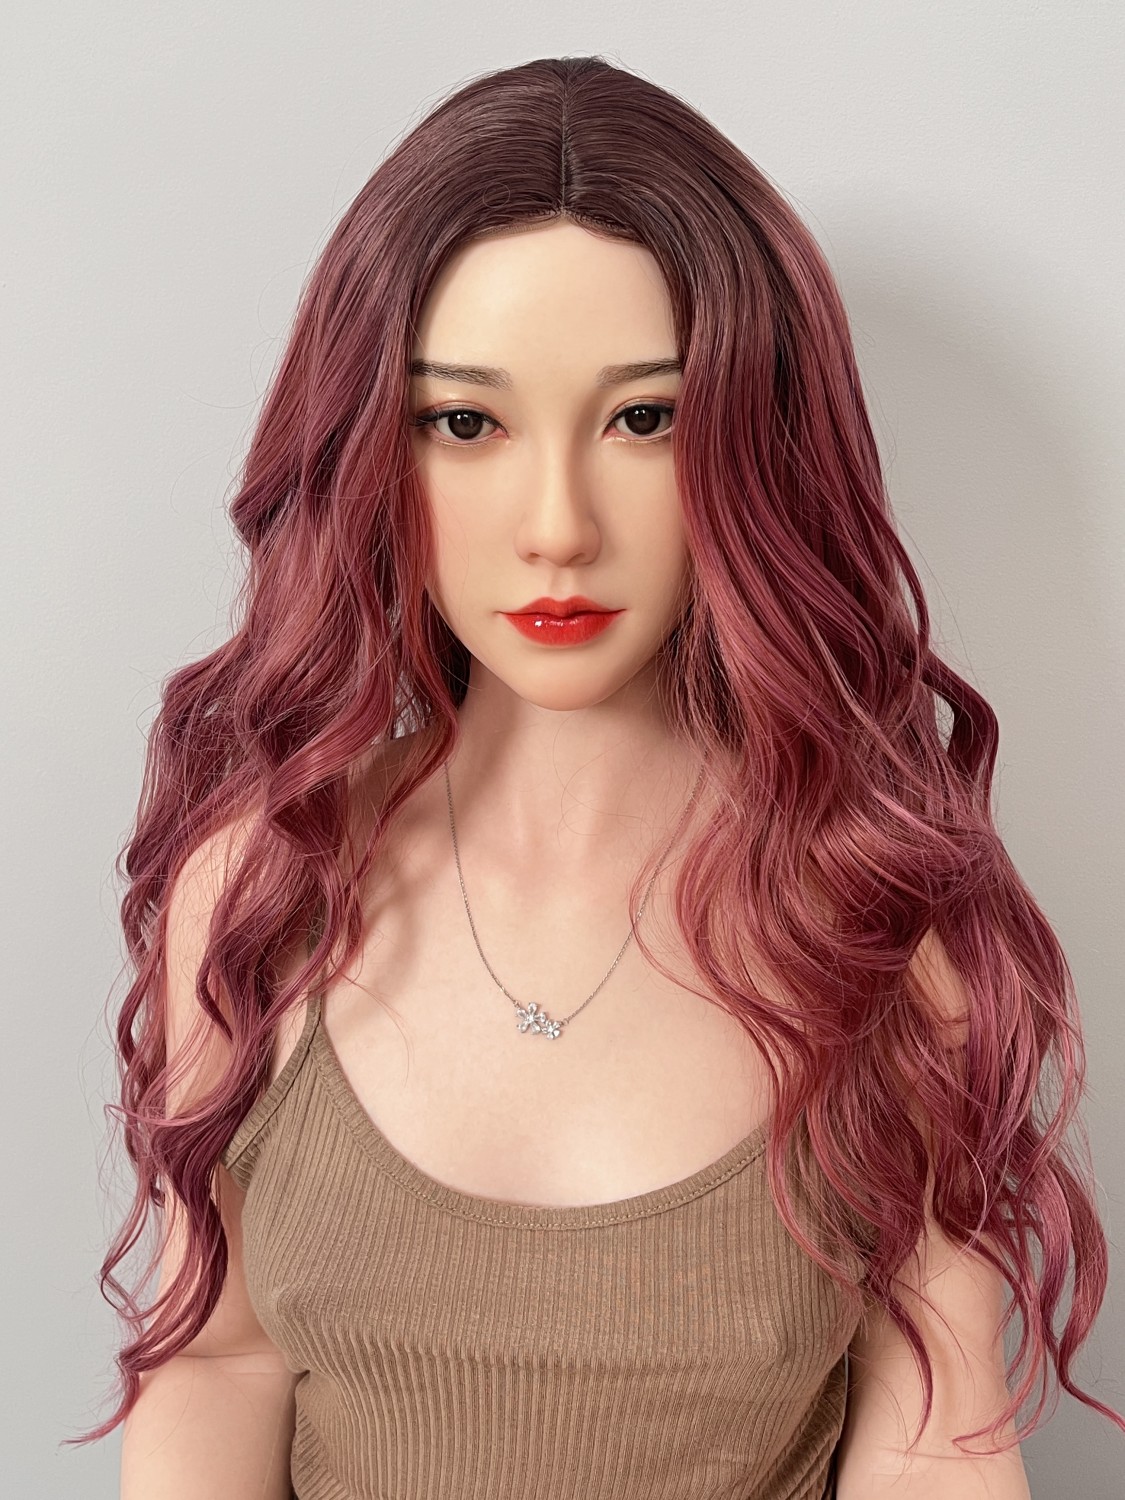 153 Cm5ft Fanreal B Cup Full Size Lifelike Silicone Sex Doll With F8 Qian Head